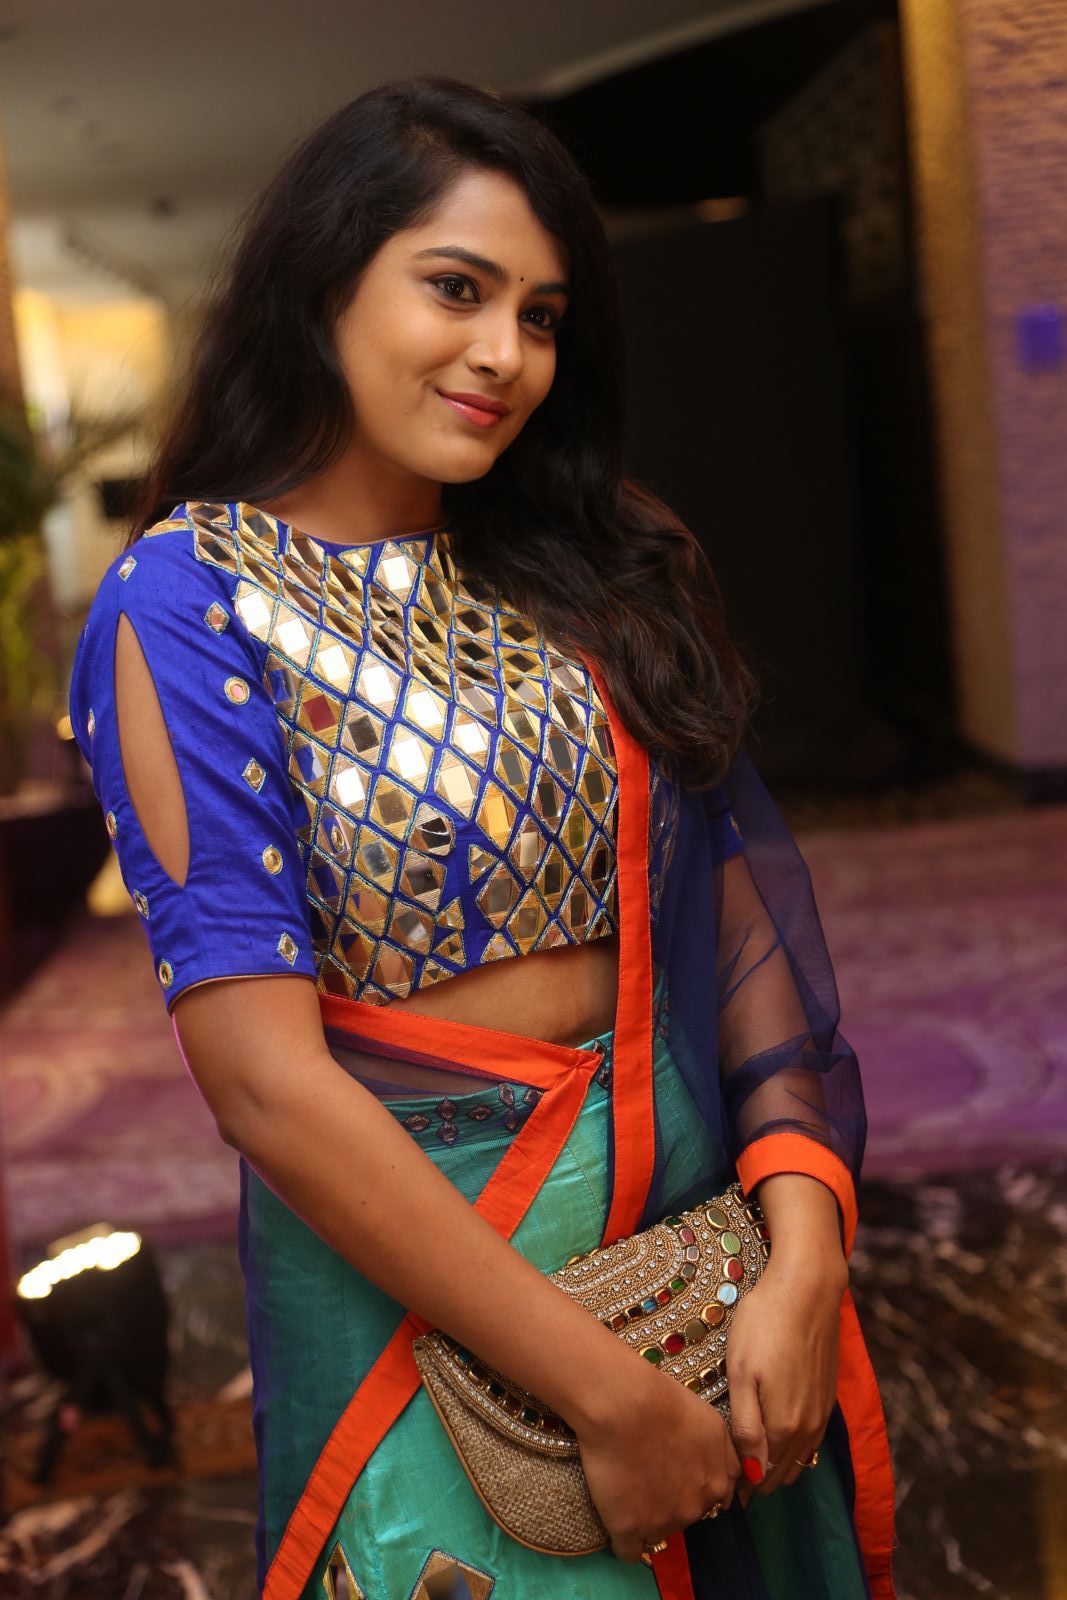 Brand New Photo Stills of Tollywood Actress Himaza | South Actresses himaza Brand New Photo Stills of Tollywood Actress Himaza | South Actresses Himaza 76